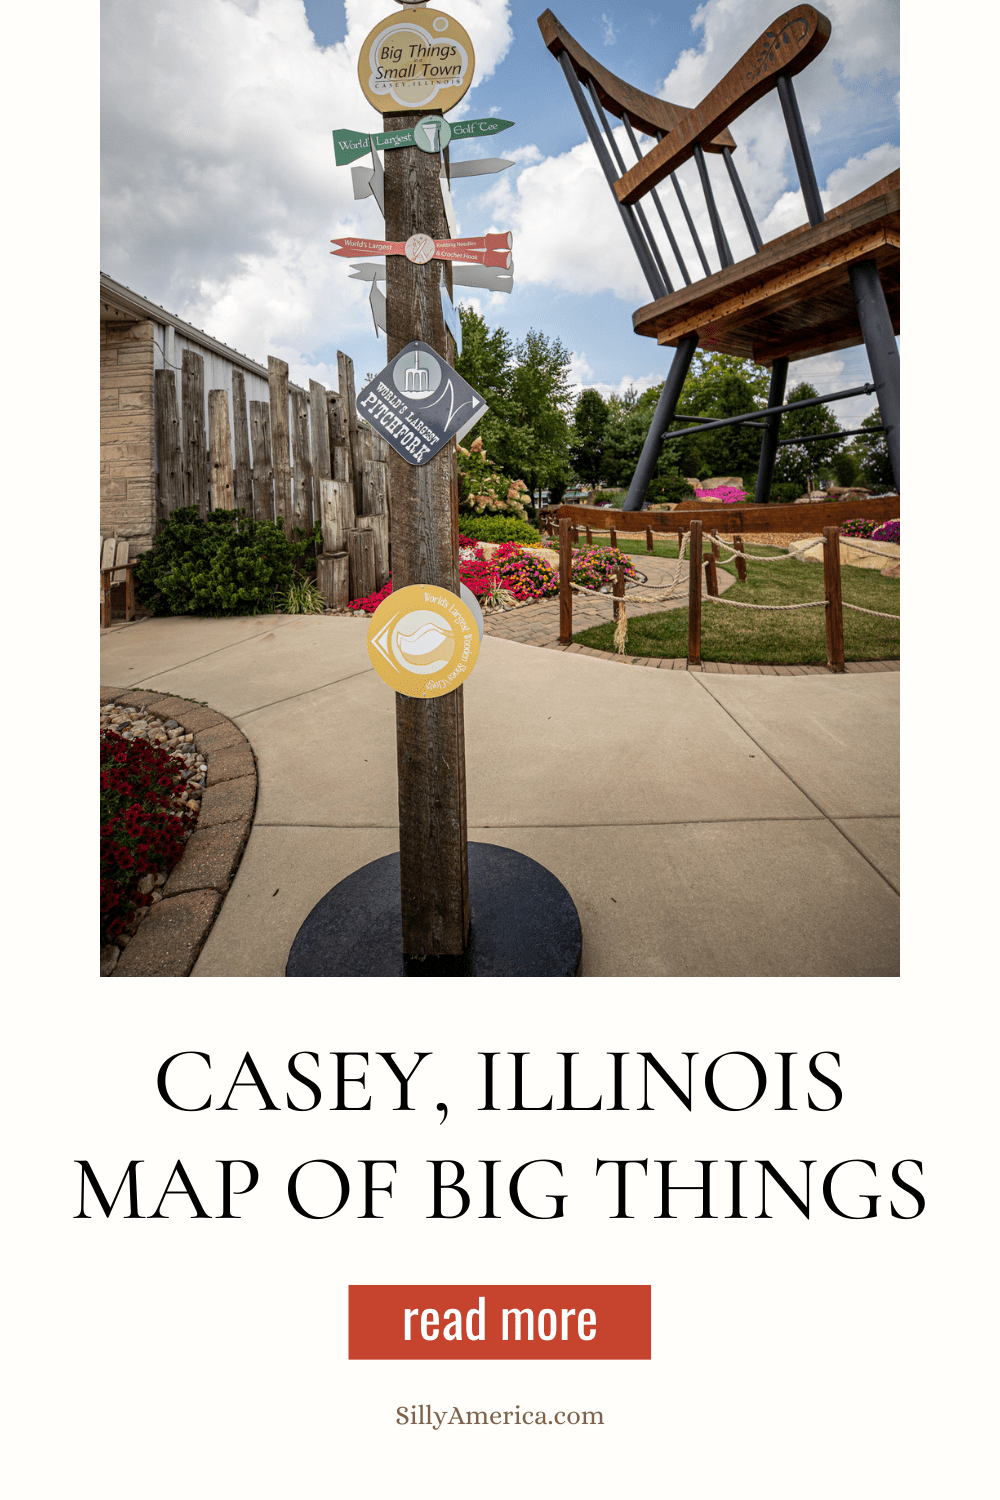 Check out our map of Casey, Illinois attractions! Casey, Illinois is a small town known for its big things. On every corner in town you'll find a different world's largest roadside attraction. With over thirty roadside attractions packed within a small area, there is so much to see, and it is easy to lose track of it all. You'll need to reference a Casey, Illinois map of big things to make sure you see them all! #CaseyIllinois #BigThingsSmallTown #BigThingsInASmallTown #RoadsideAttractions